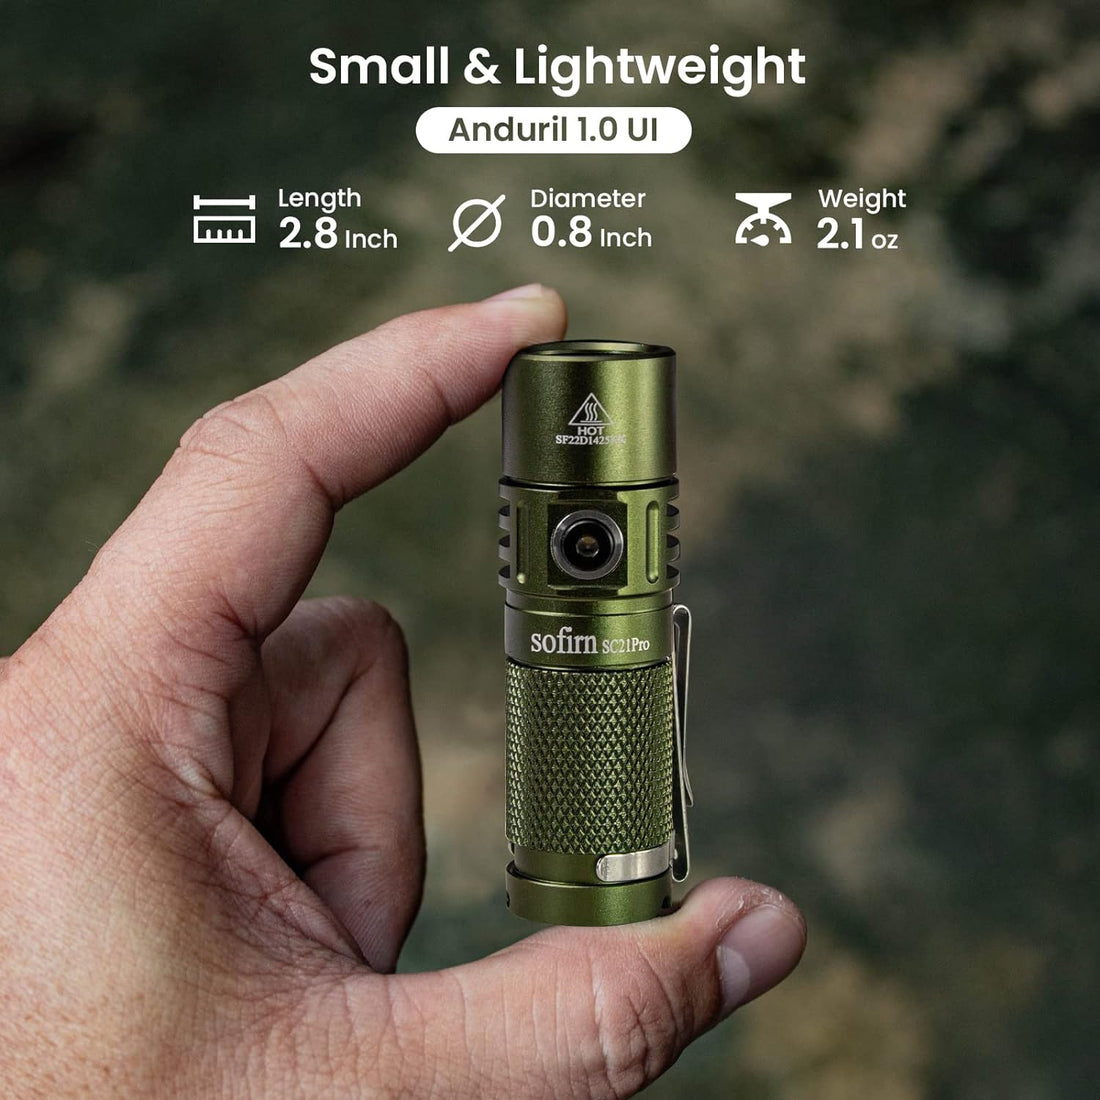 Mini Flashlight, Sofirn SC21 Pro with Upgraded Anduril UI, Super Bright 90 High CRI Samsung LH351D with Max Output of 1100lm, Small Pocket EDC, USBC Rechargeable(Green)